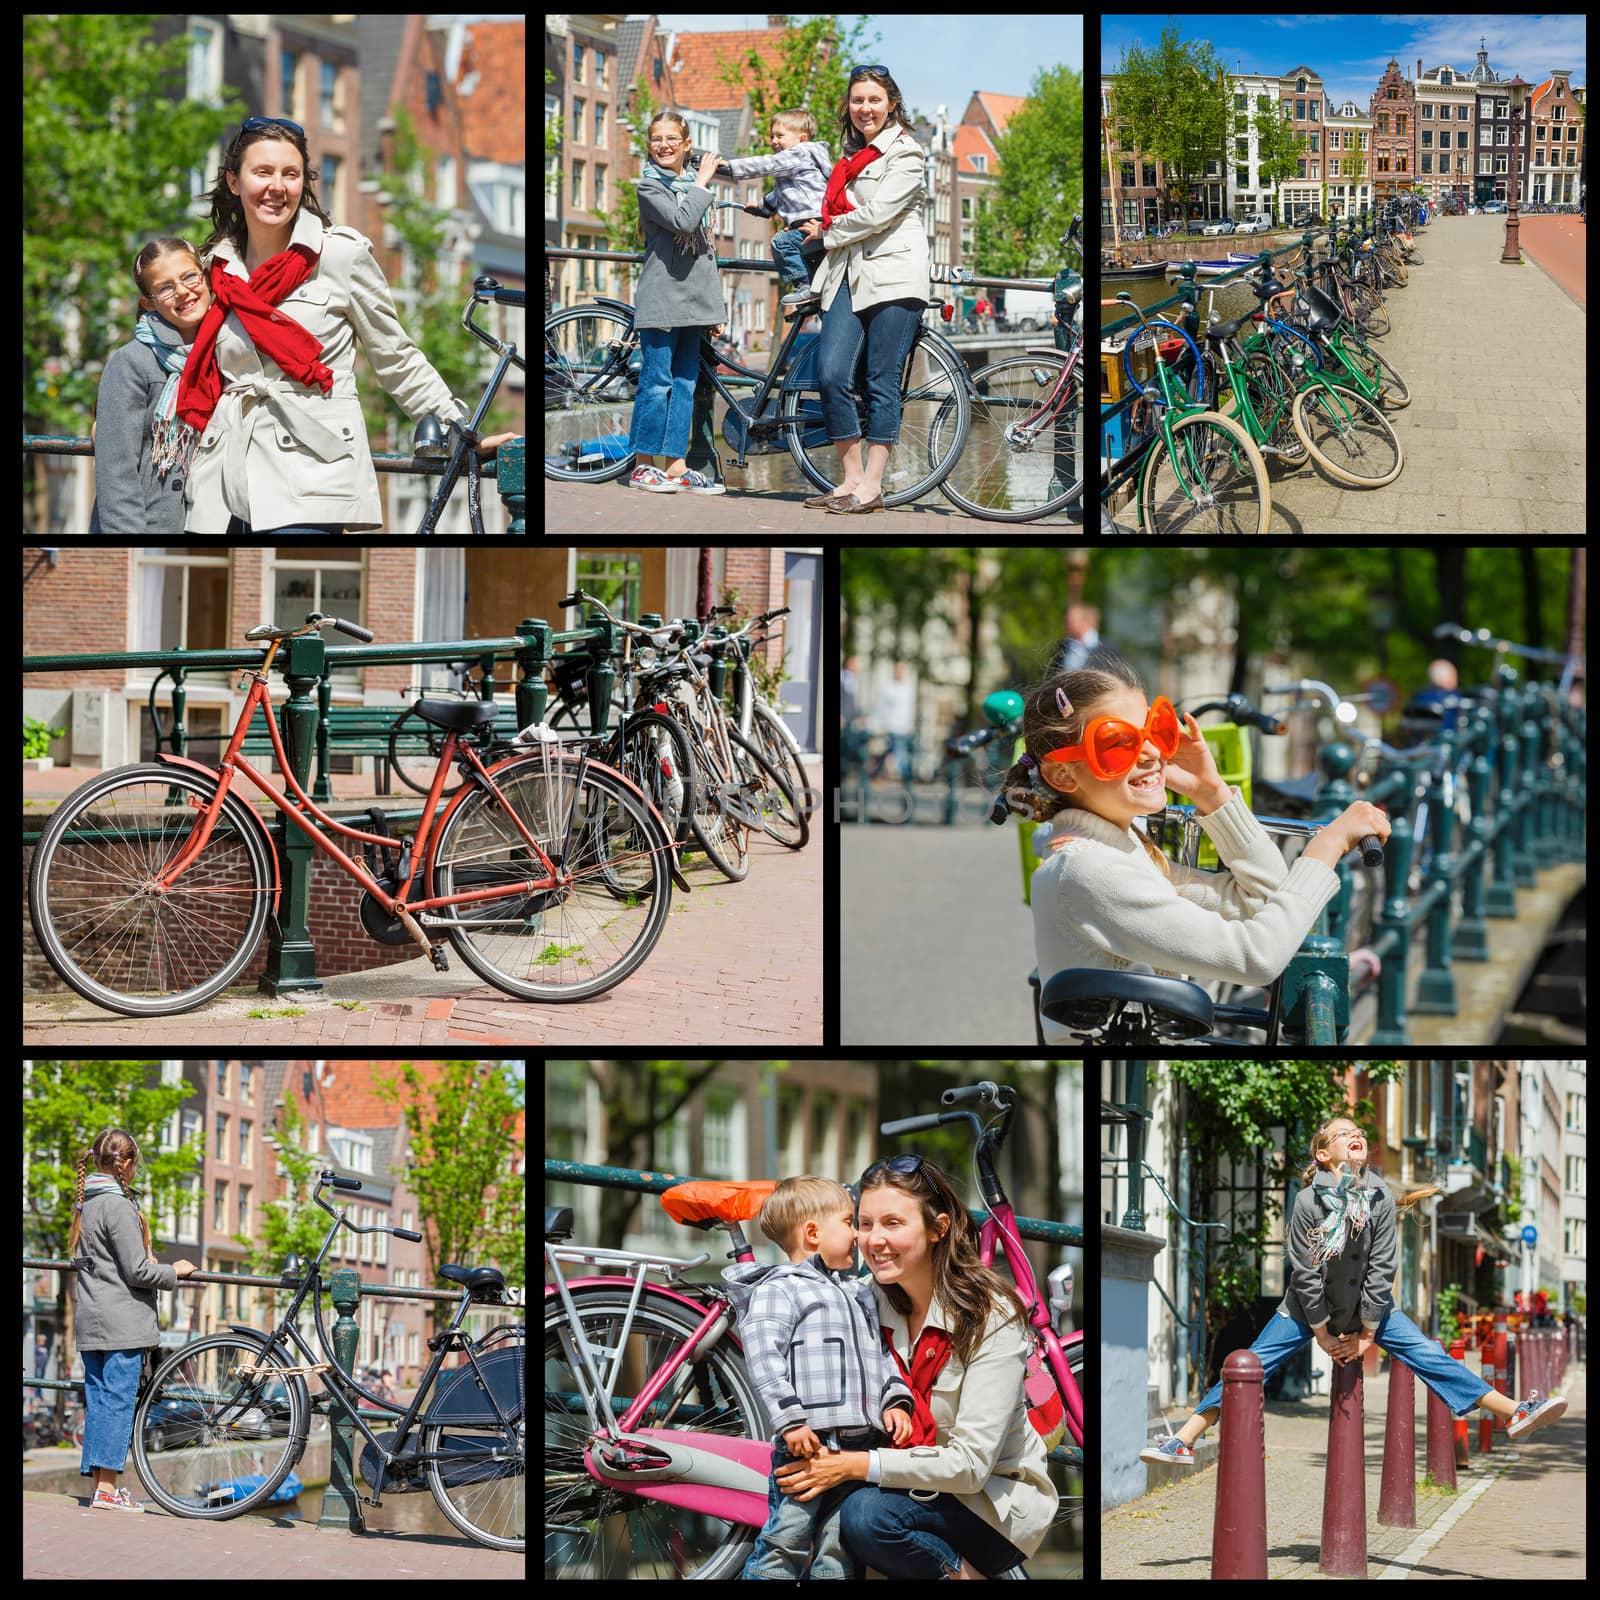 Tourists in Amsterdam. by maxoliki